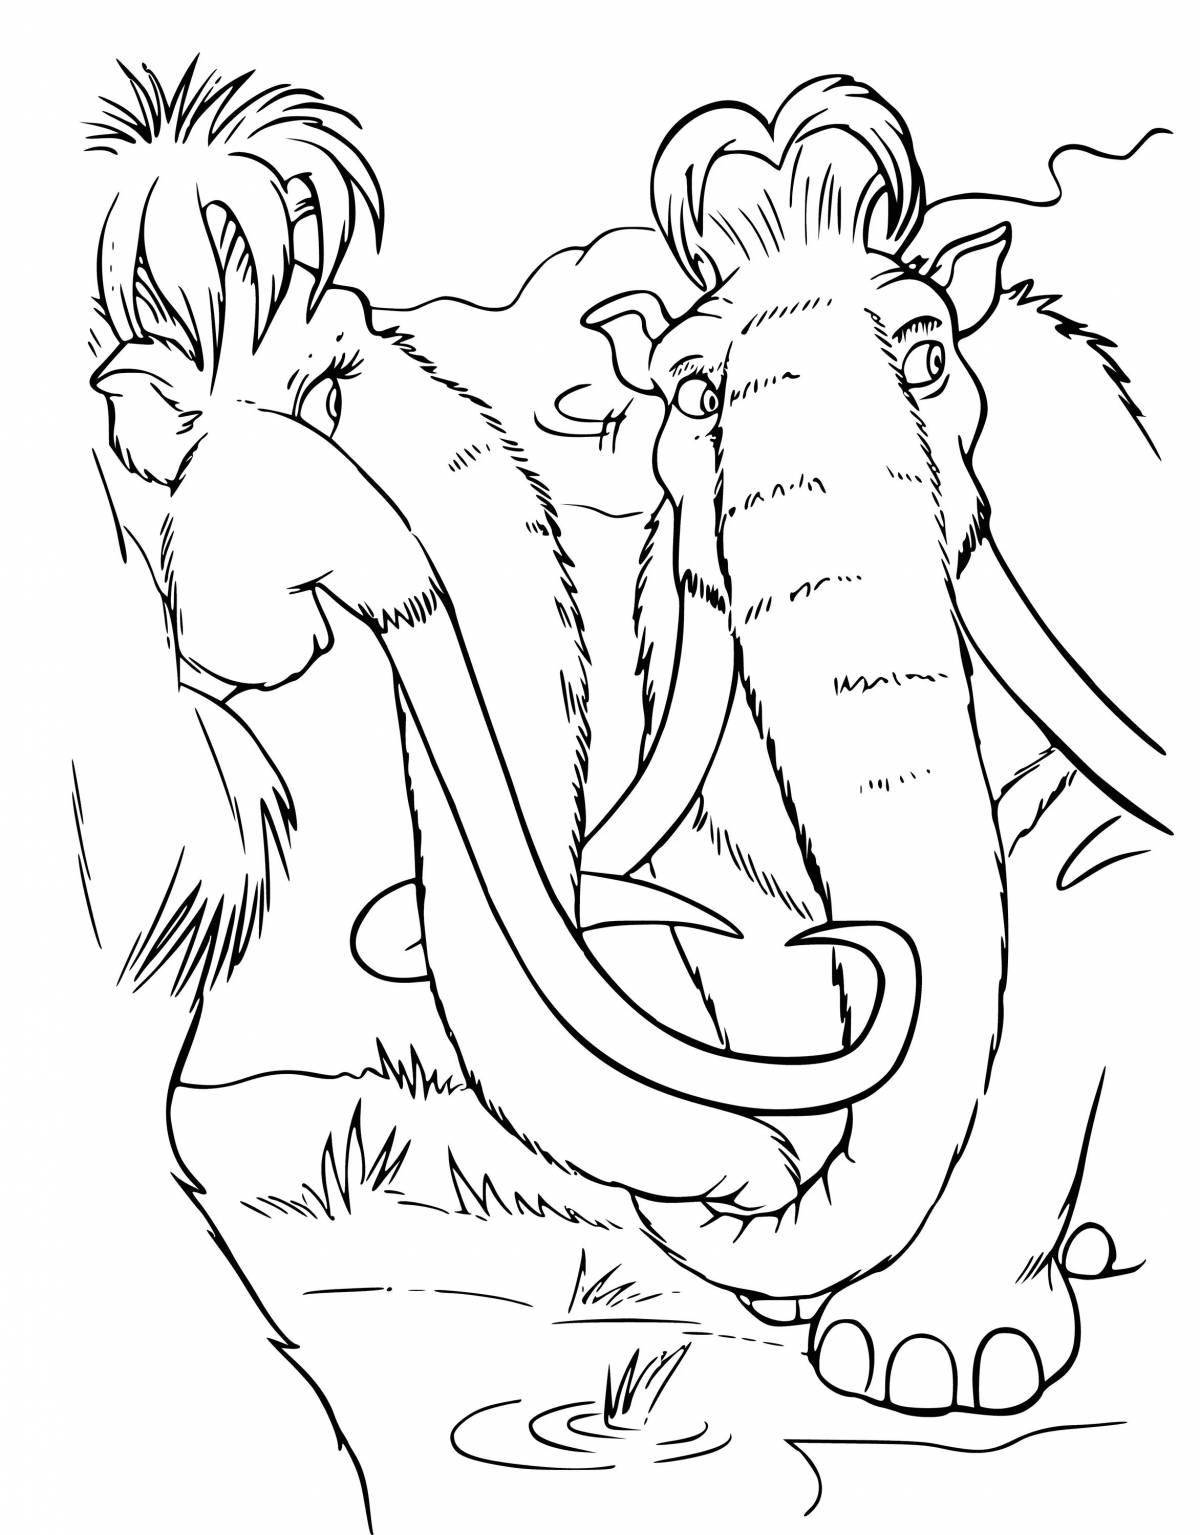 Innovative mammoth coloring book for kids